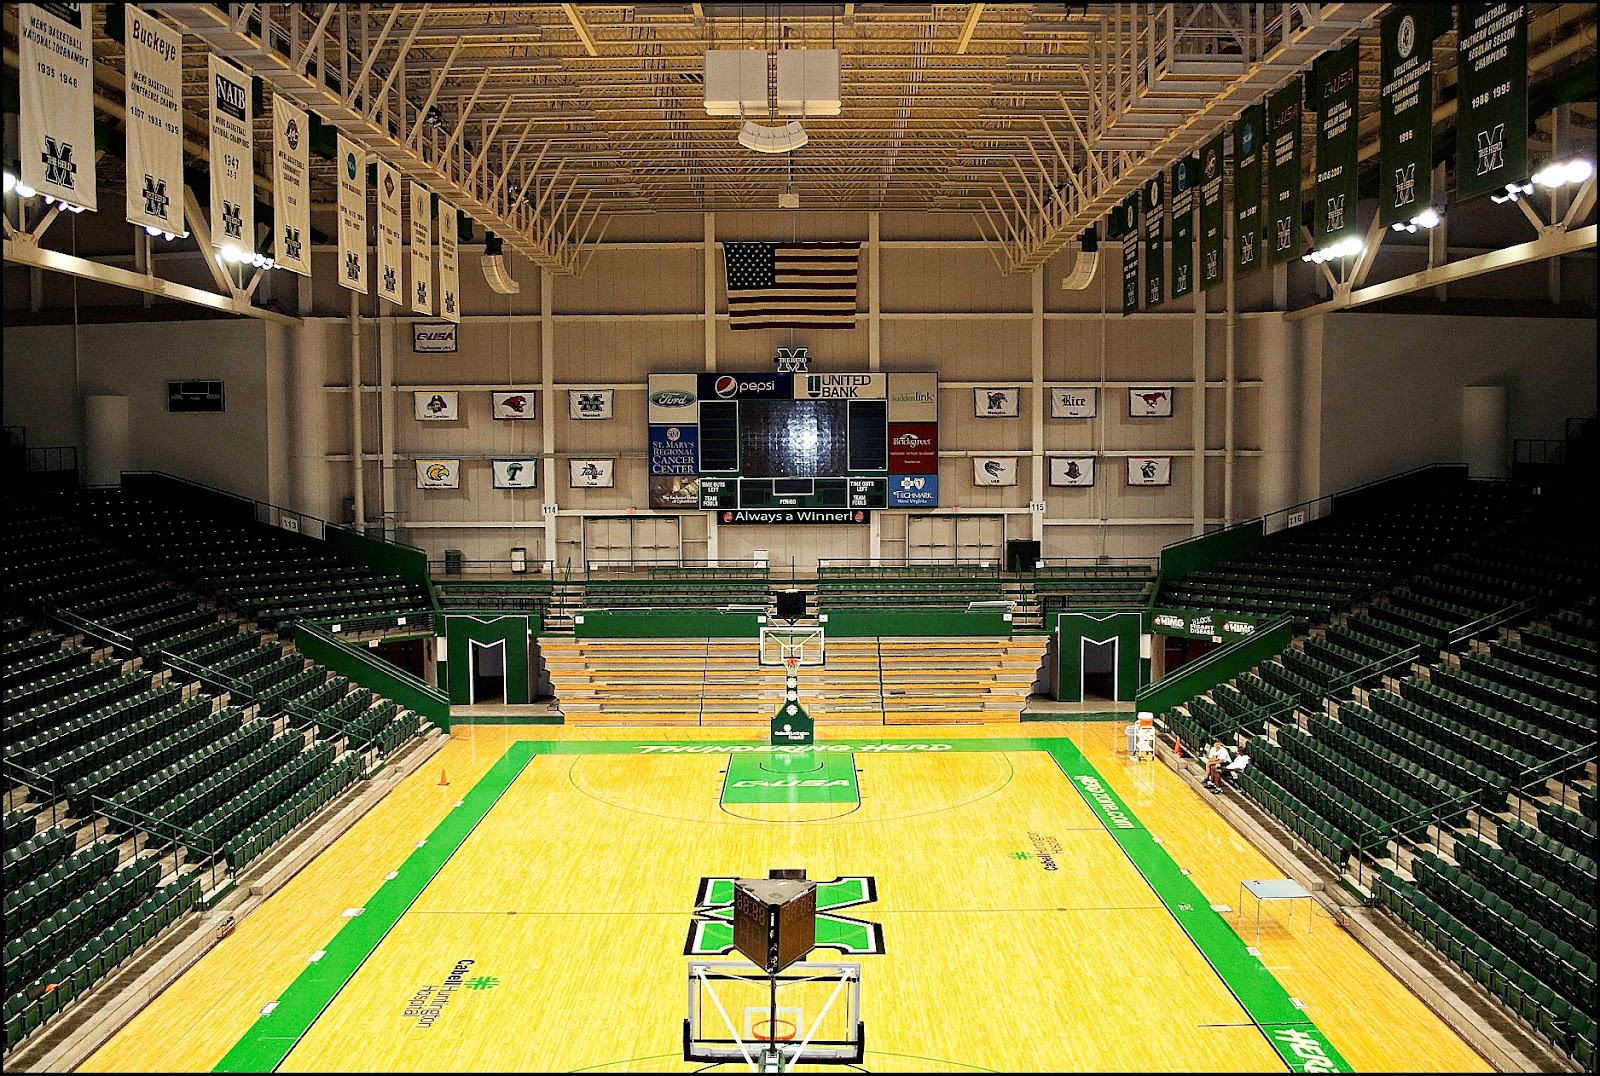 Marshall University’s Cam Henderson Center Gets In the Zone With HARMAN